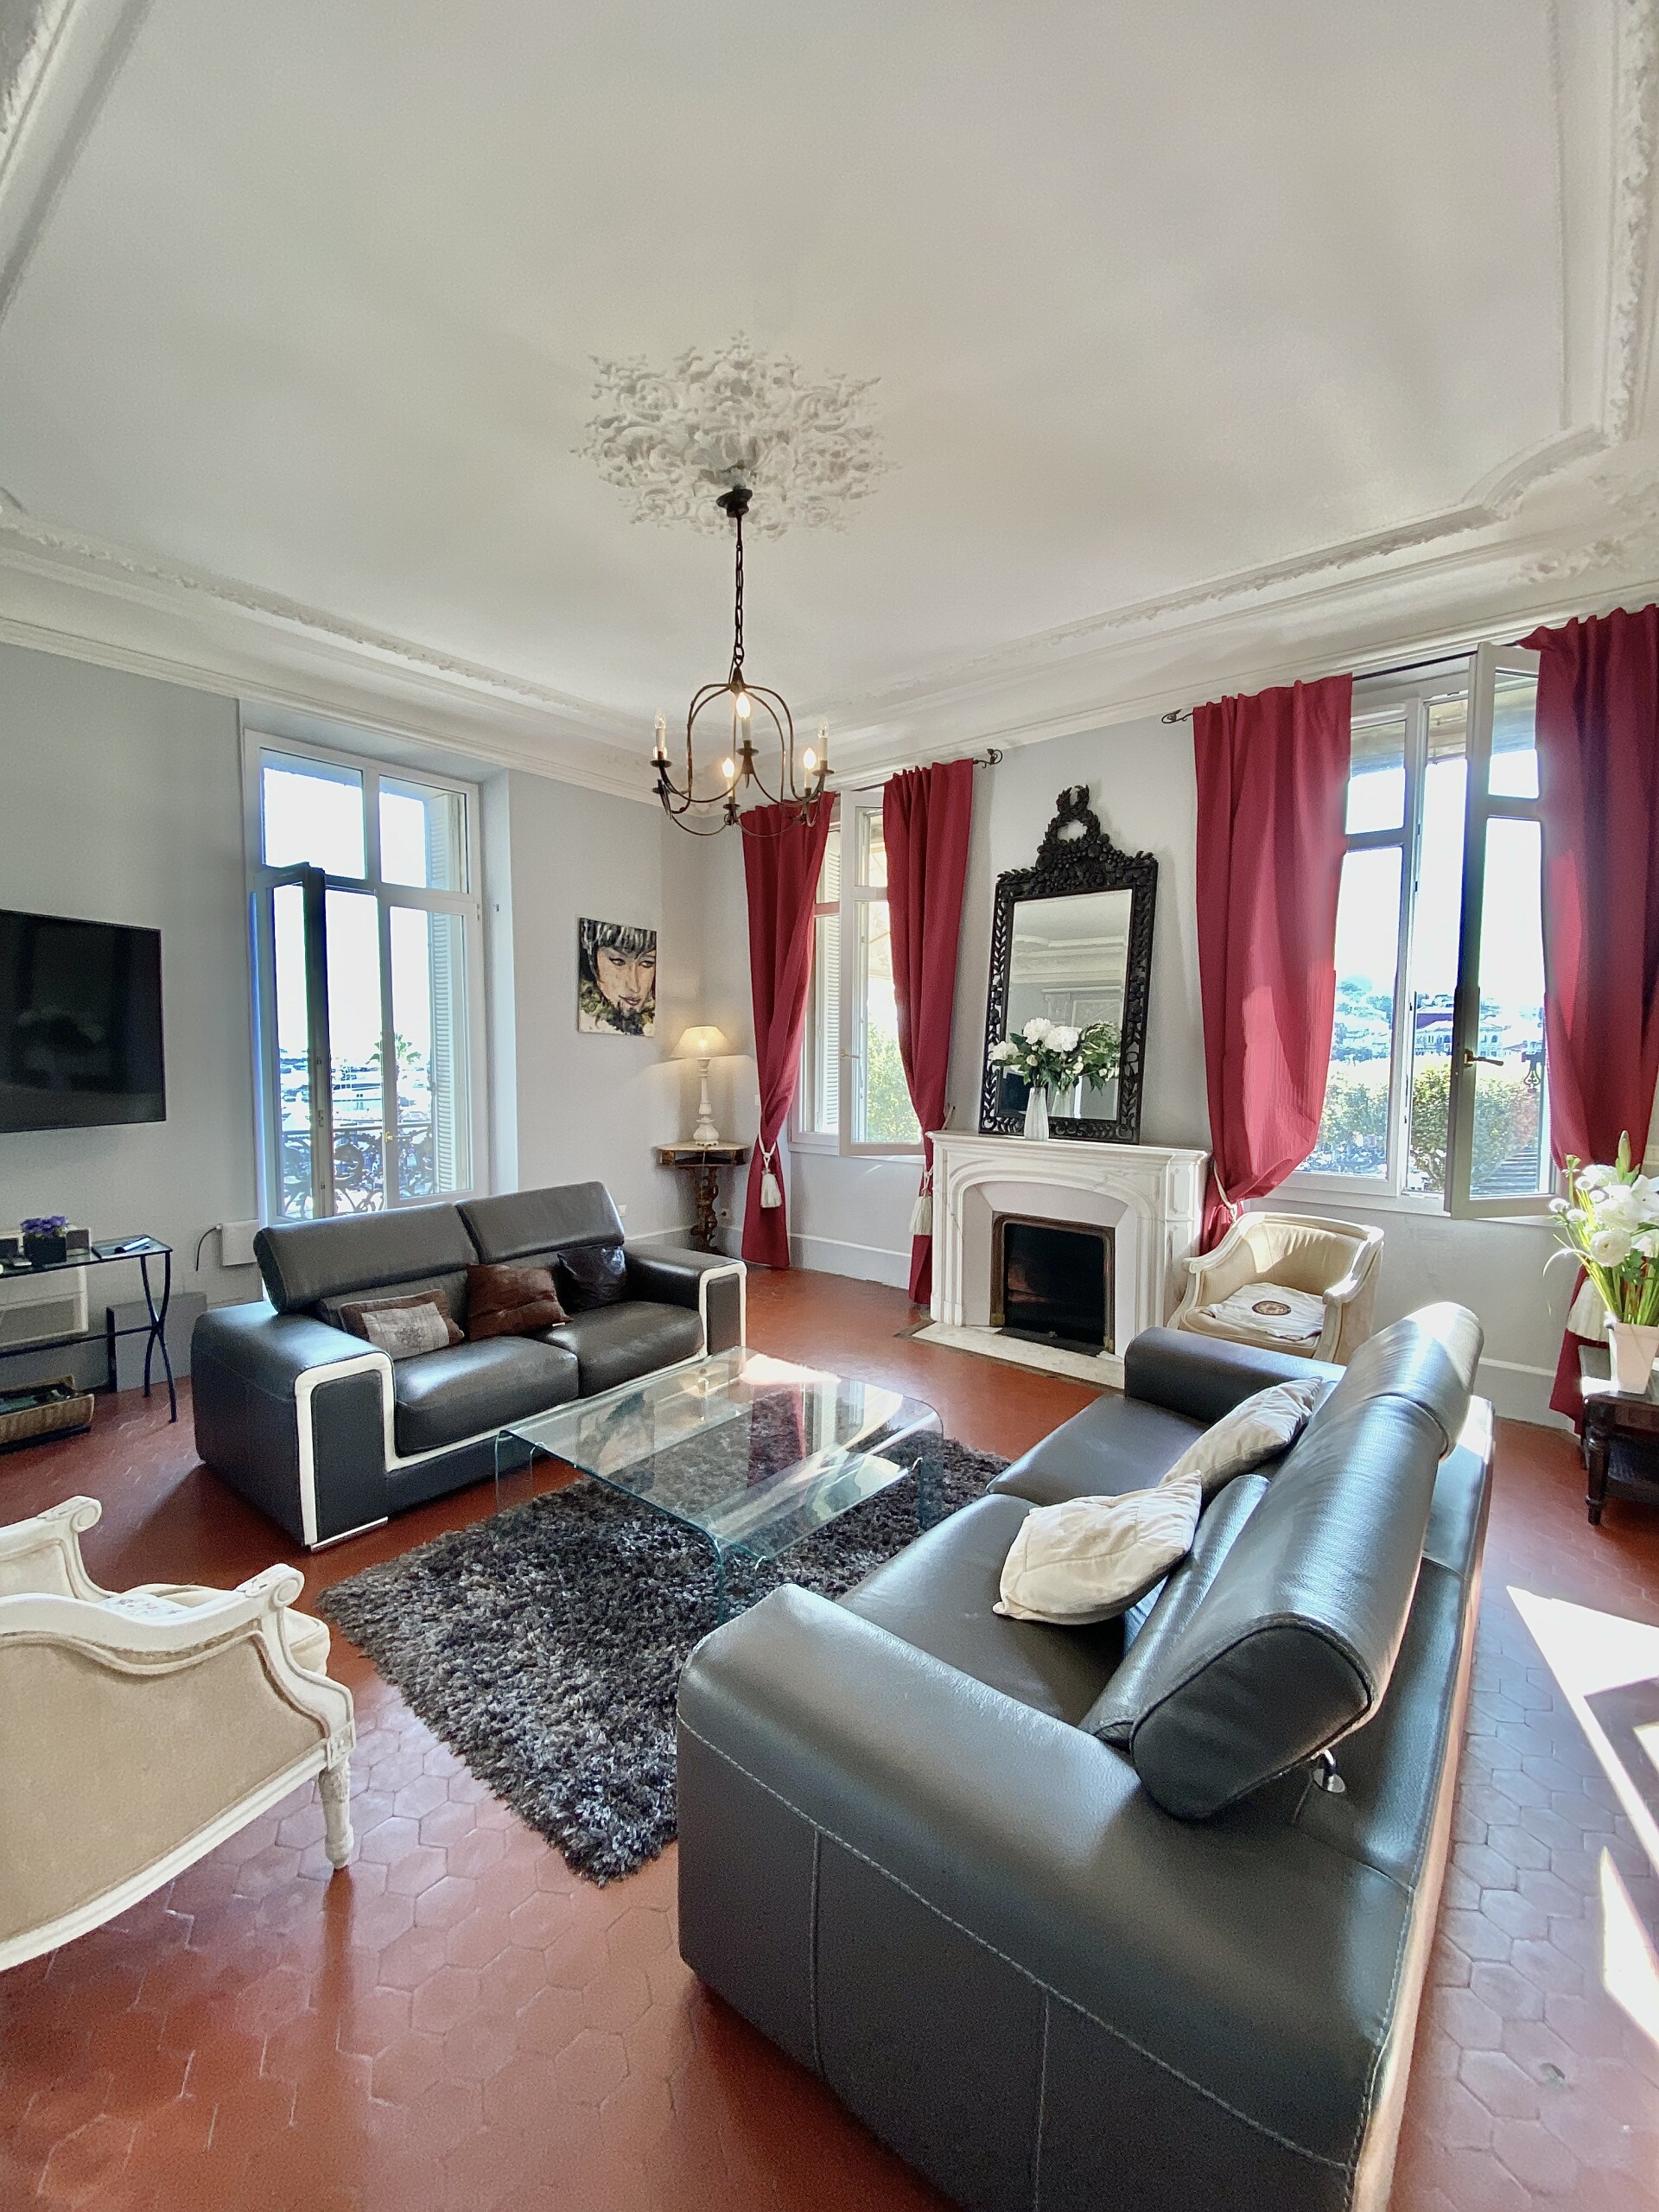 Property Image 2 - 3 bedroom apartment, that is one street away from Palais de Festivals